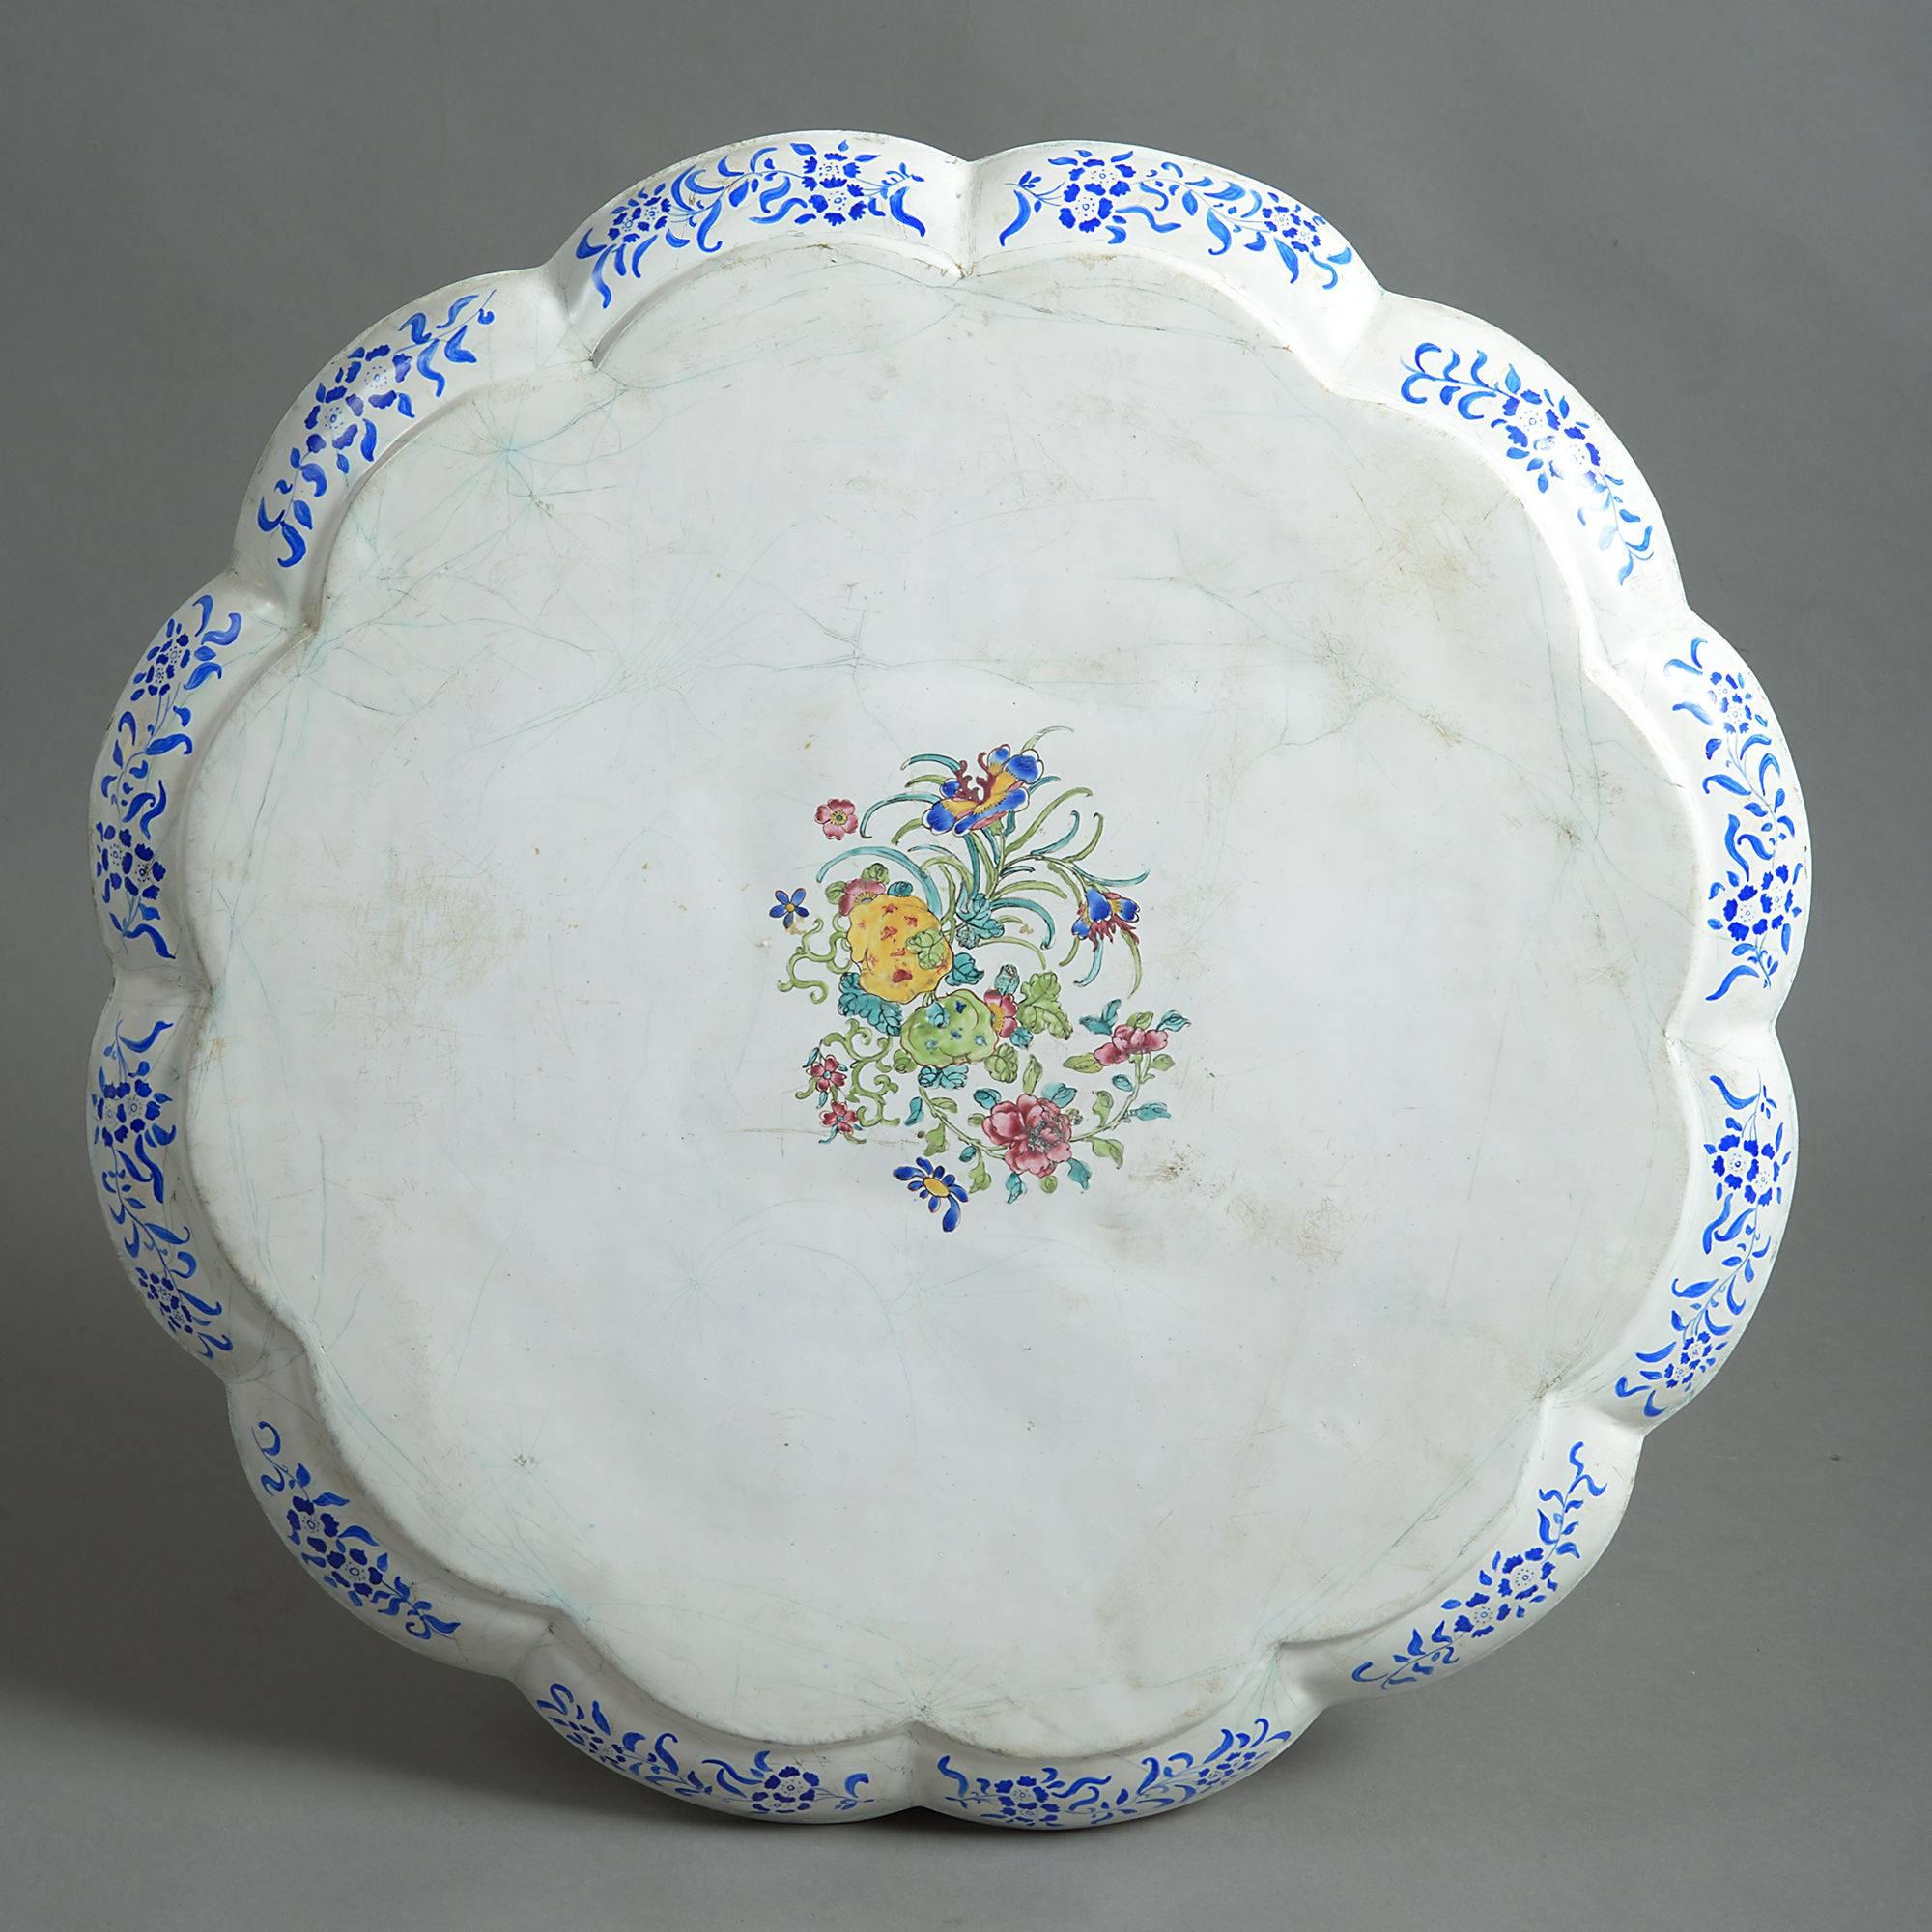 An 18th century canton enamel charger of great scale, having a scalloped edge and decorated throughout with floral vignettes.